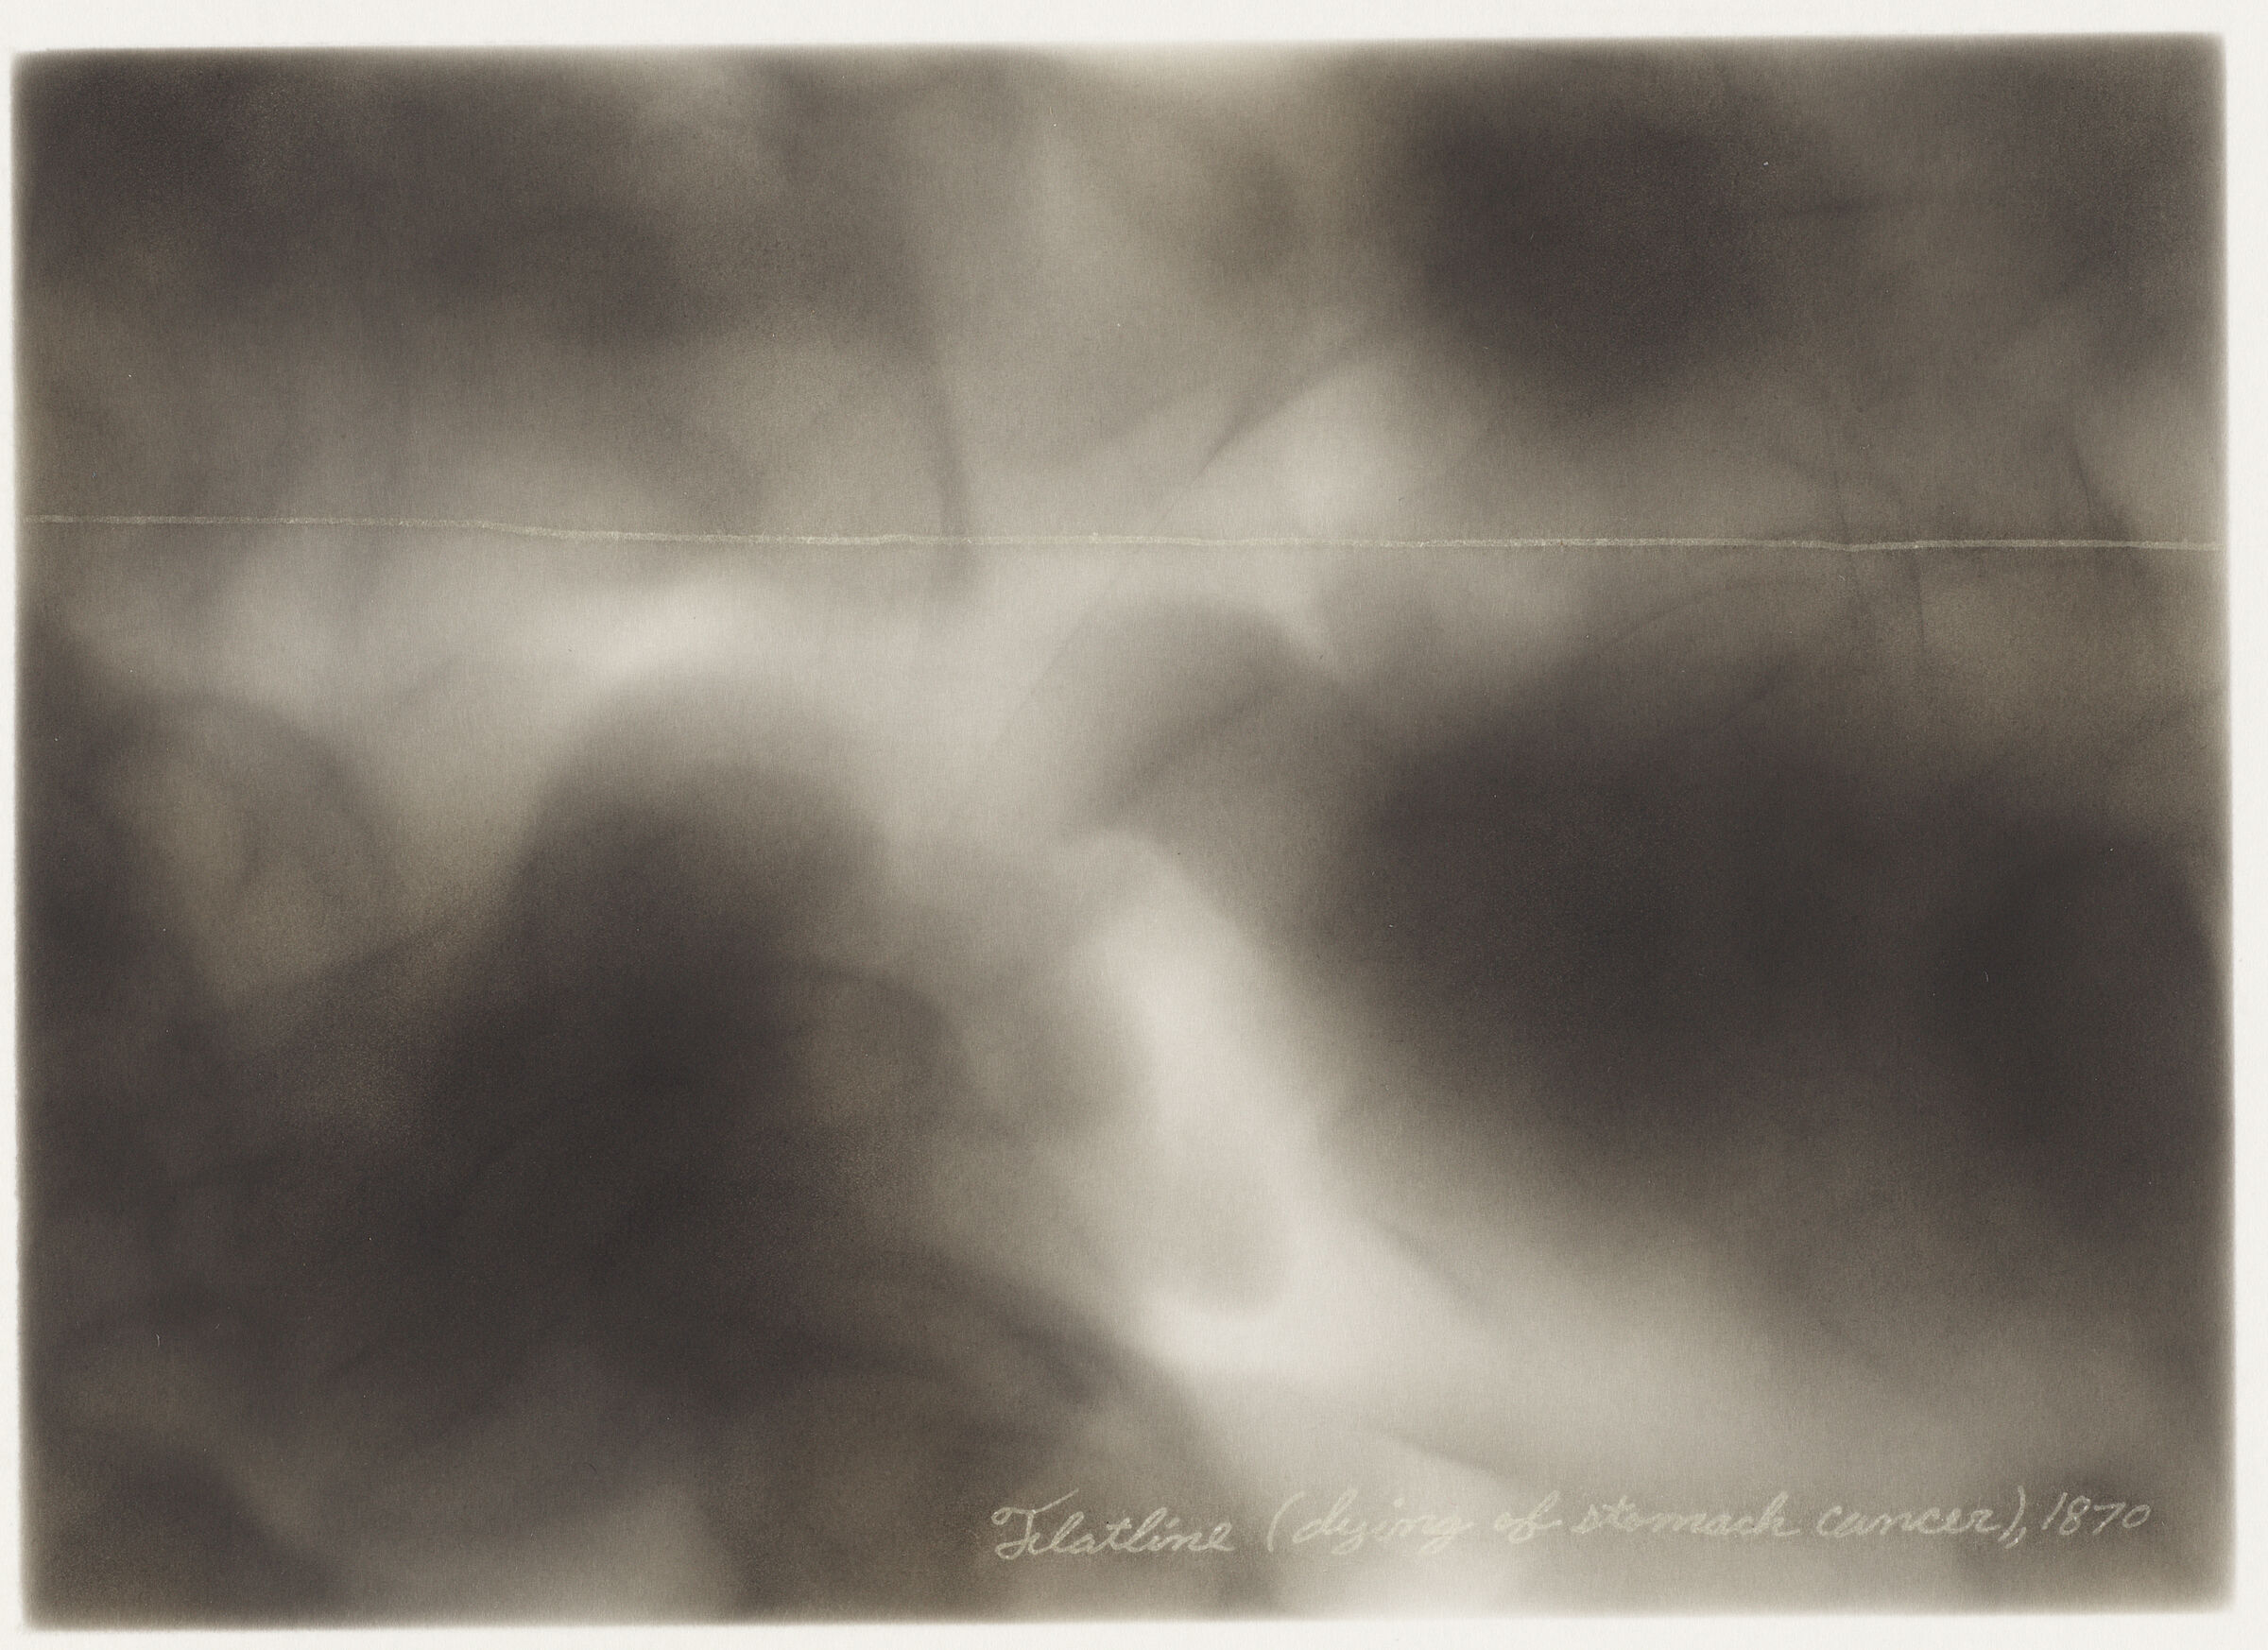 Flatline (Dying Of Stomach Cancer), 1870